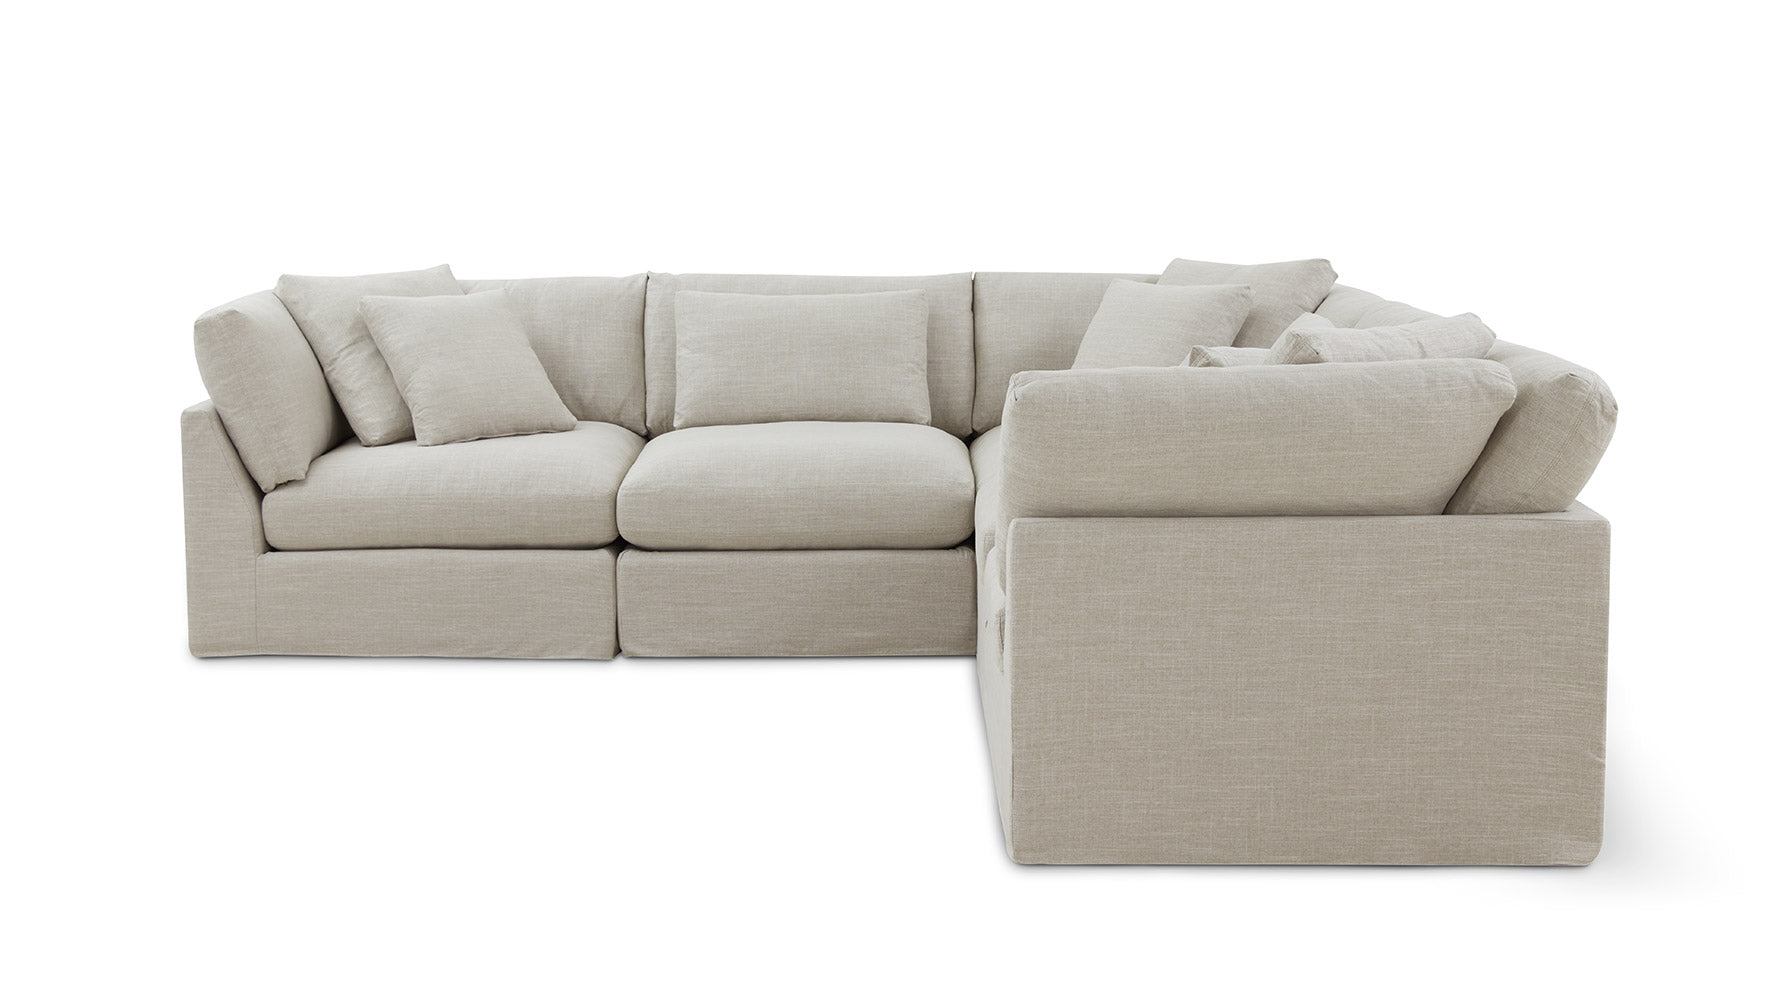 Get Together™ 5-Piece Modular Sectional Closed, Large, Light Pebble - Image 1